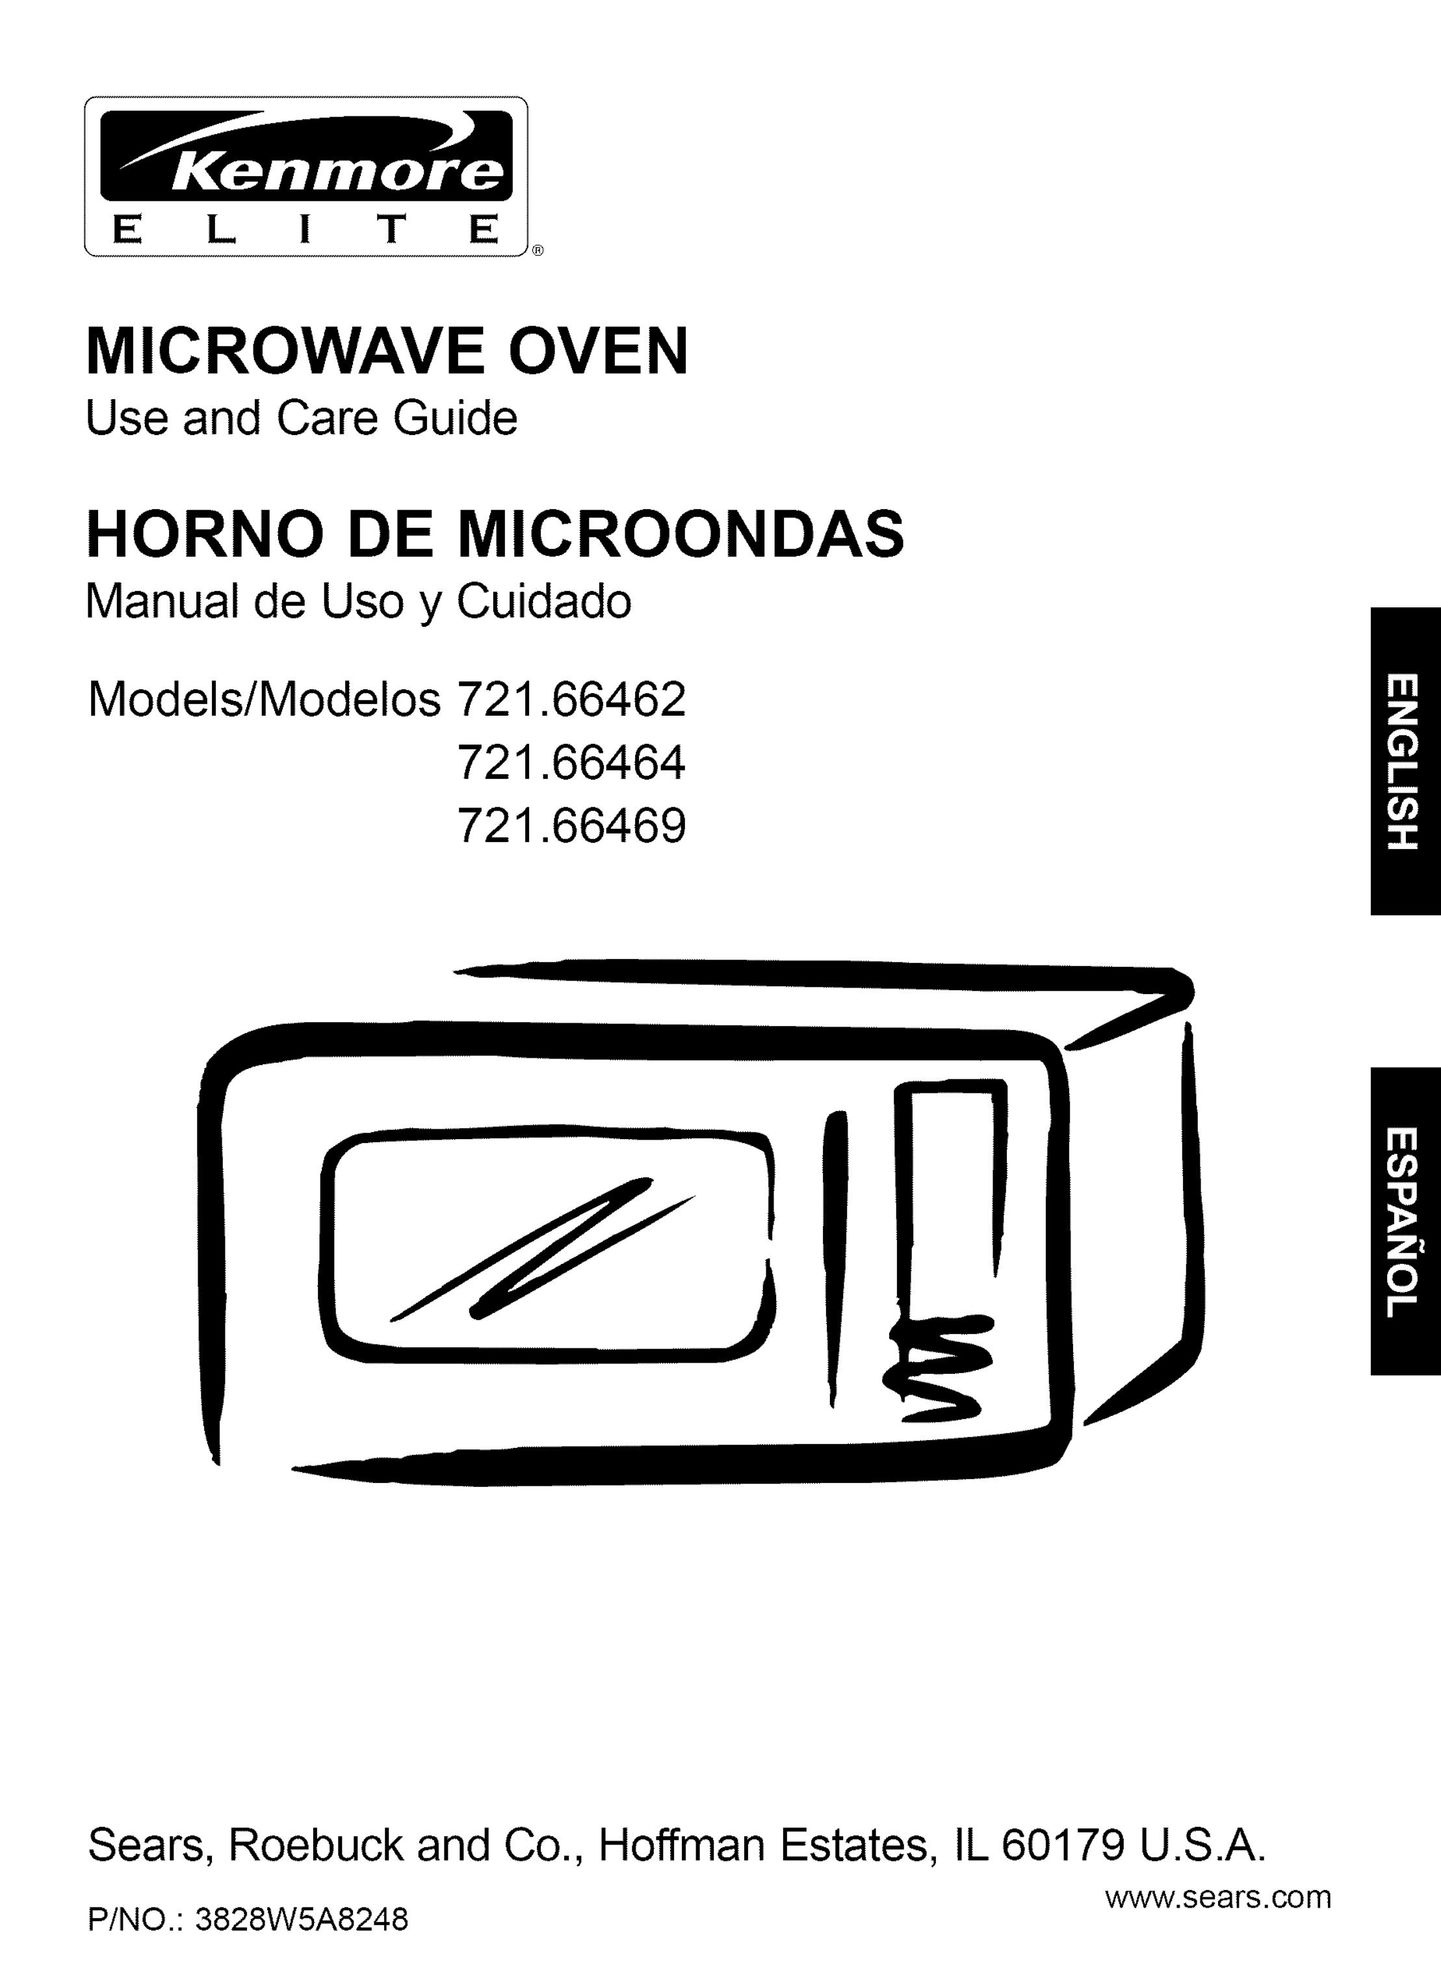 Kenmore 721.66462 Microwave Oven User Manual